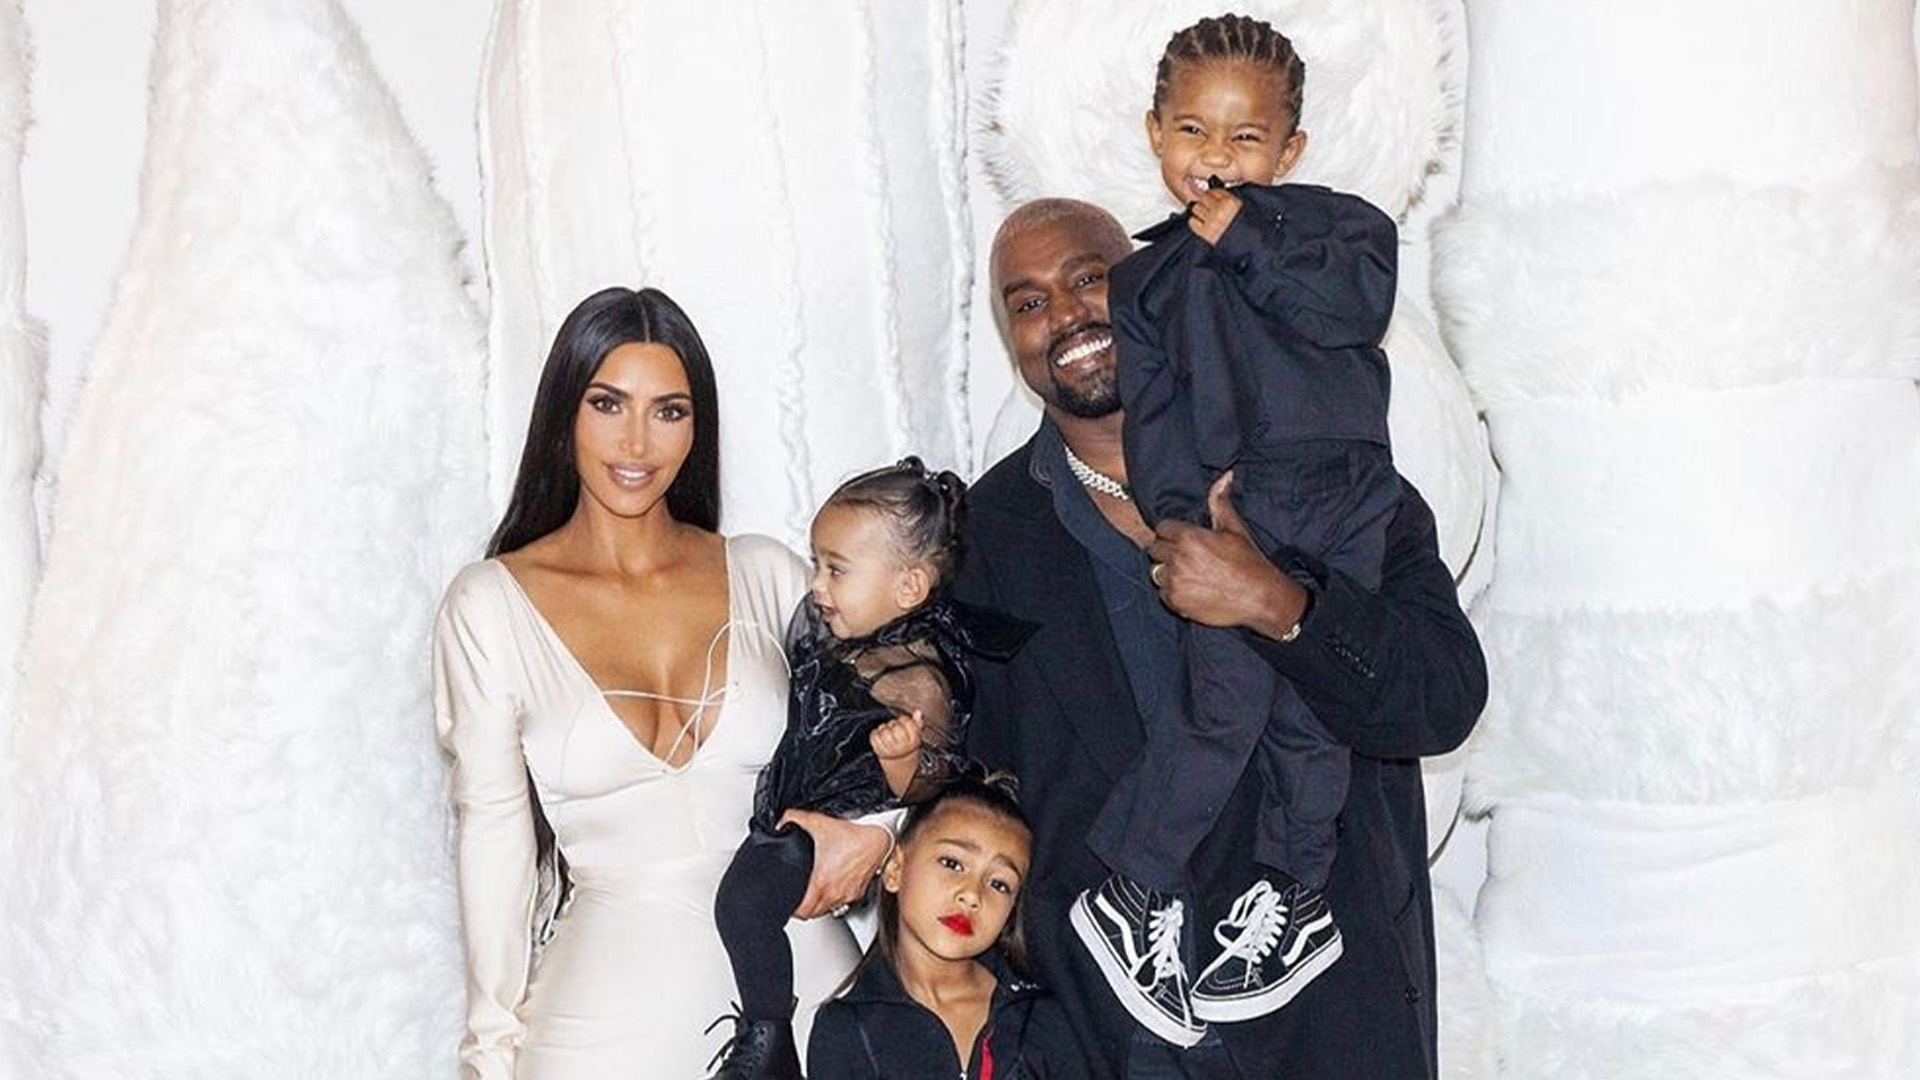 Kim Kardashian admits mistake in allowing daughter North West to wear red lipstick for family photo after backlash